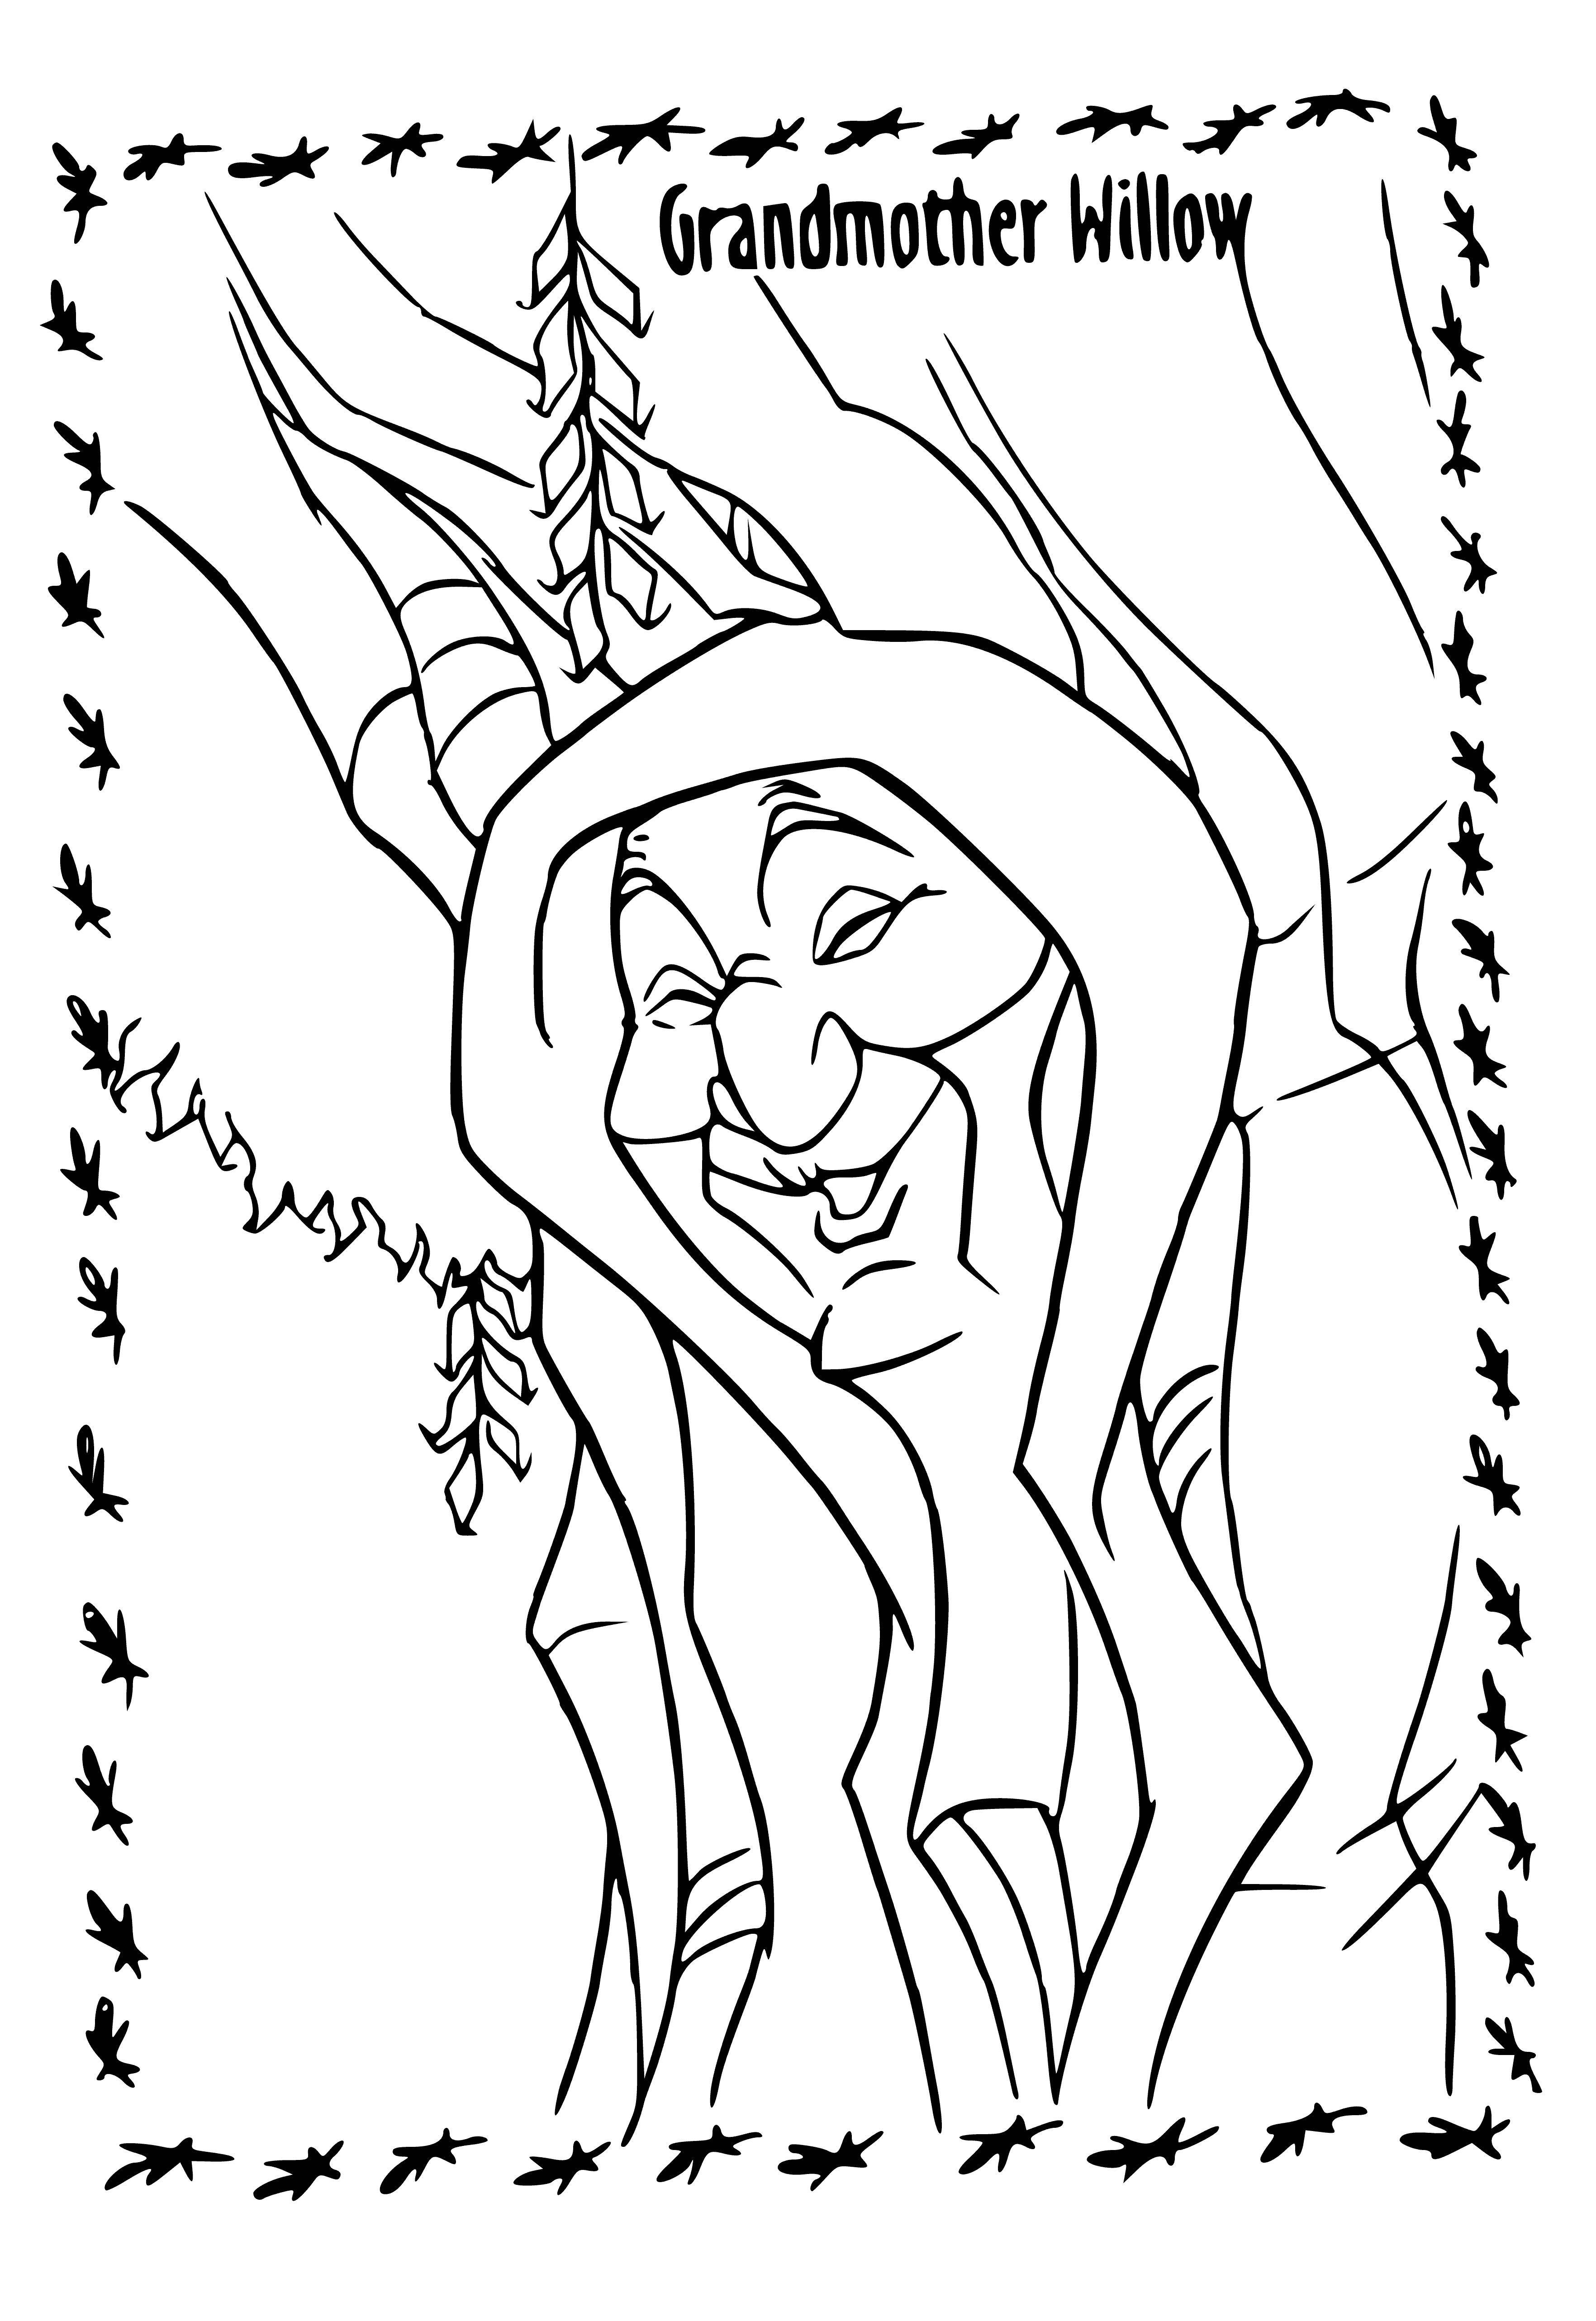 coloring page: Girl marvels at willow tree, with green branches & light brown trunk. She wears a light dress & scarf, smiling peacefully.